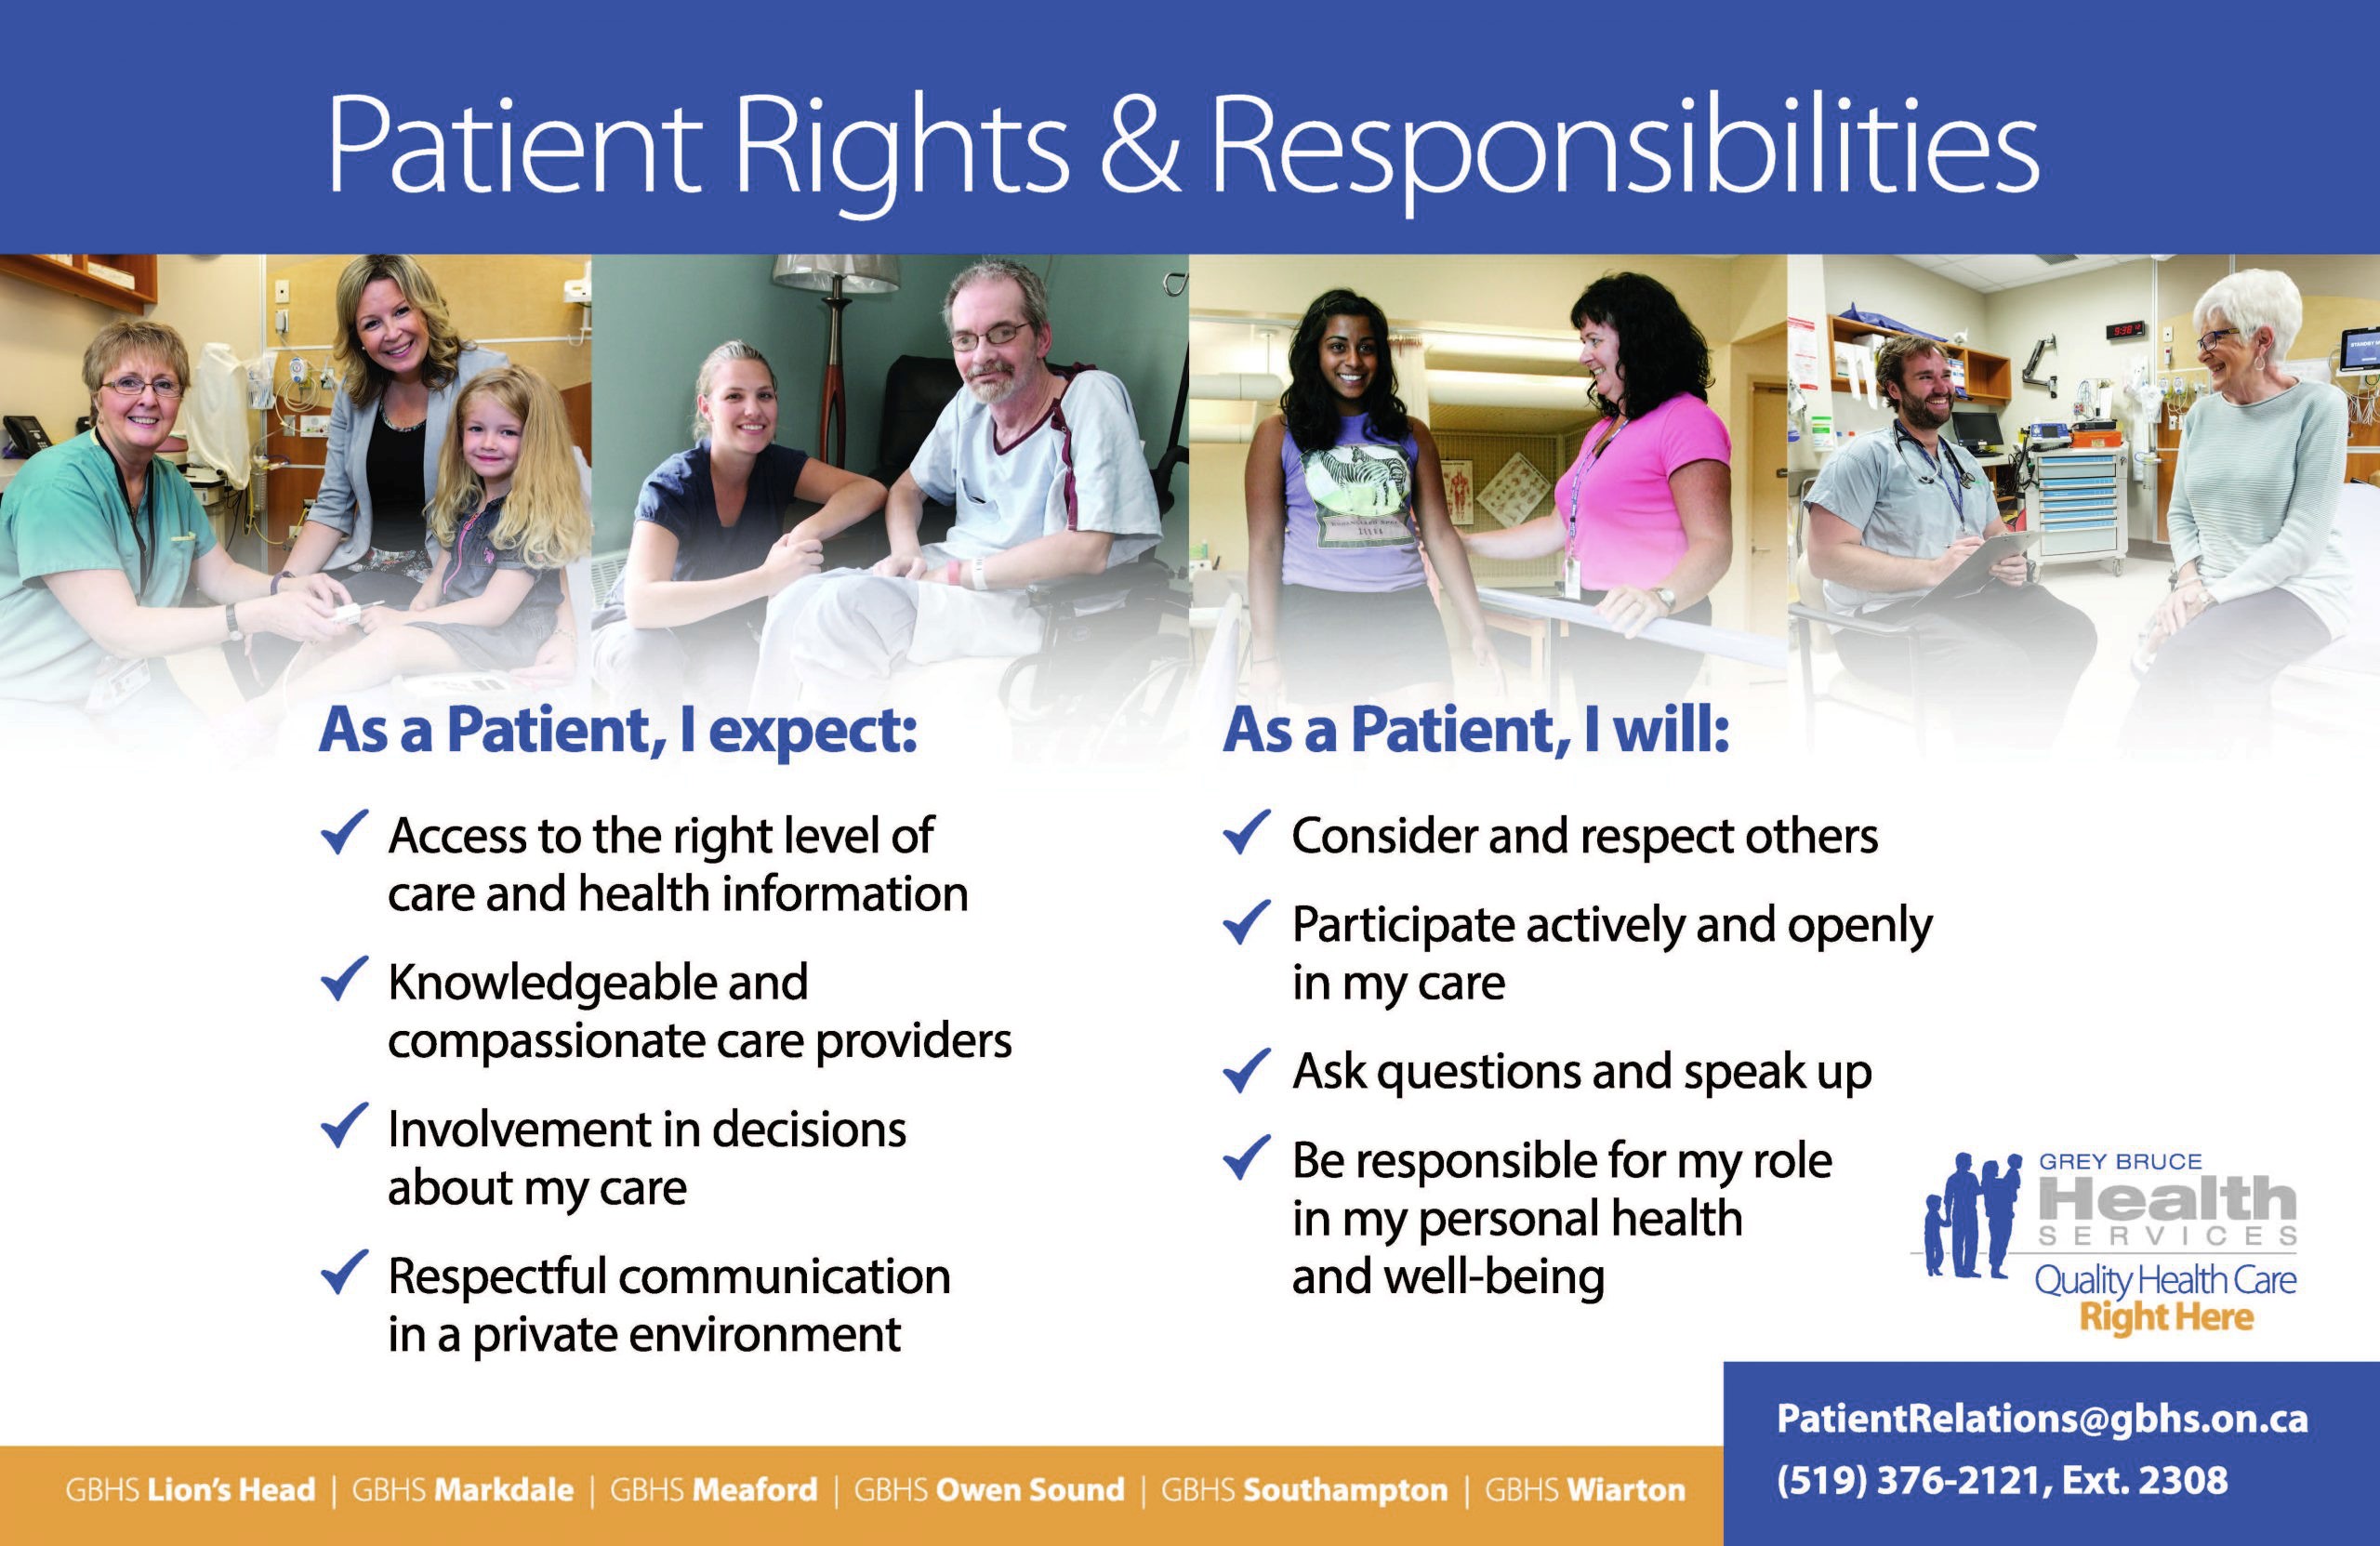 Patient Rights and Responsibilities poster